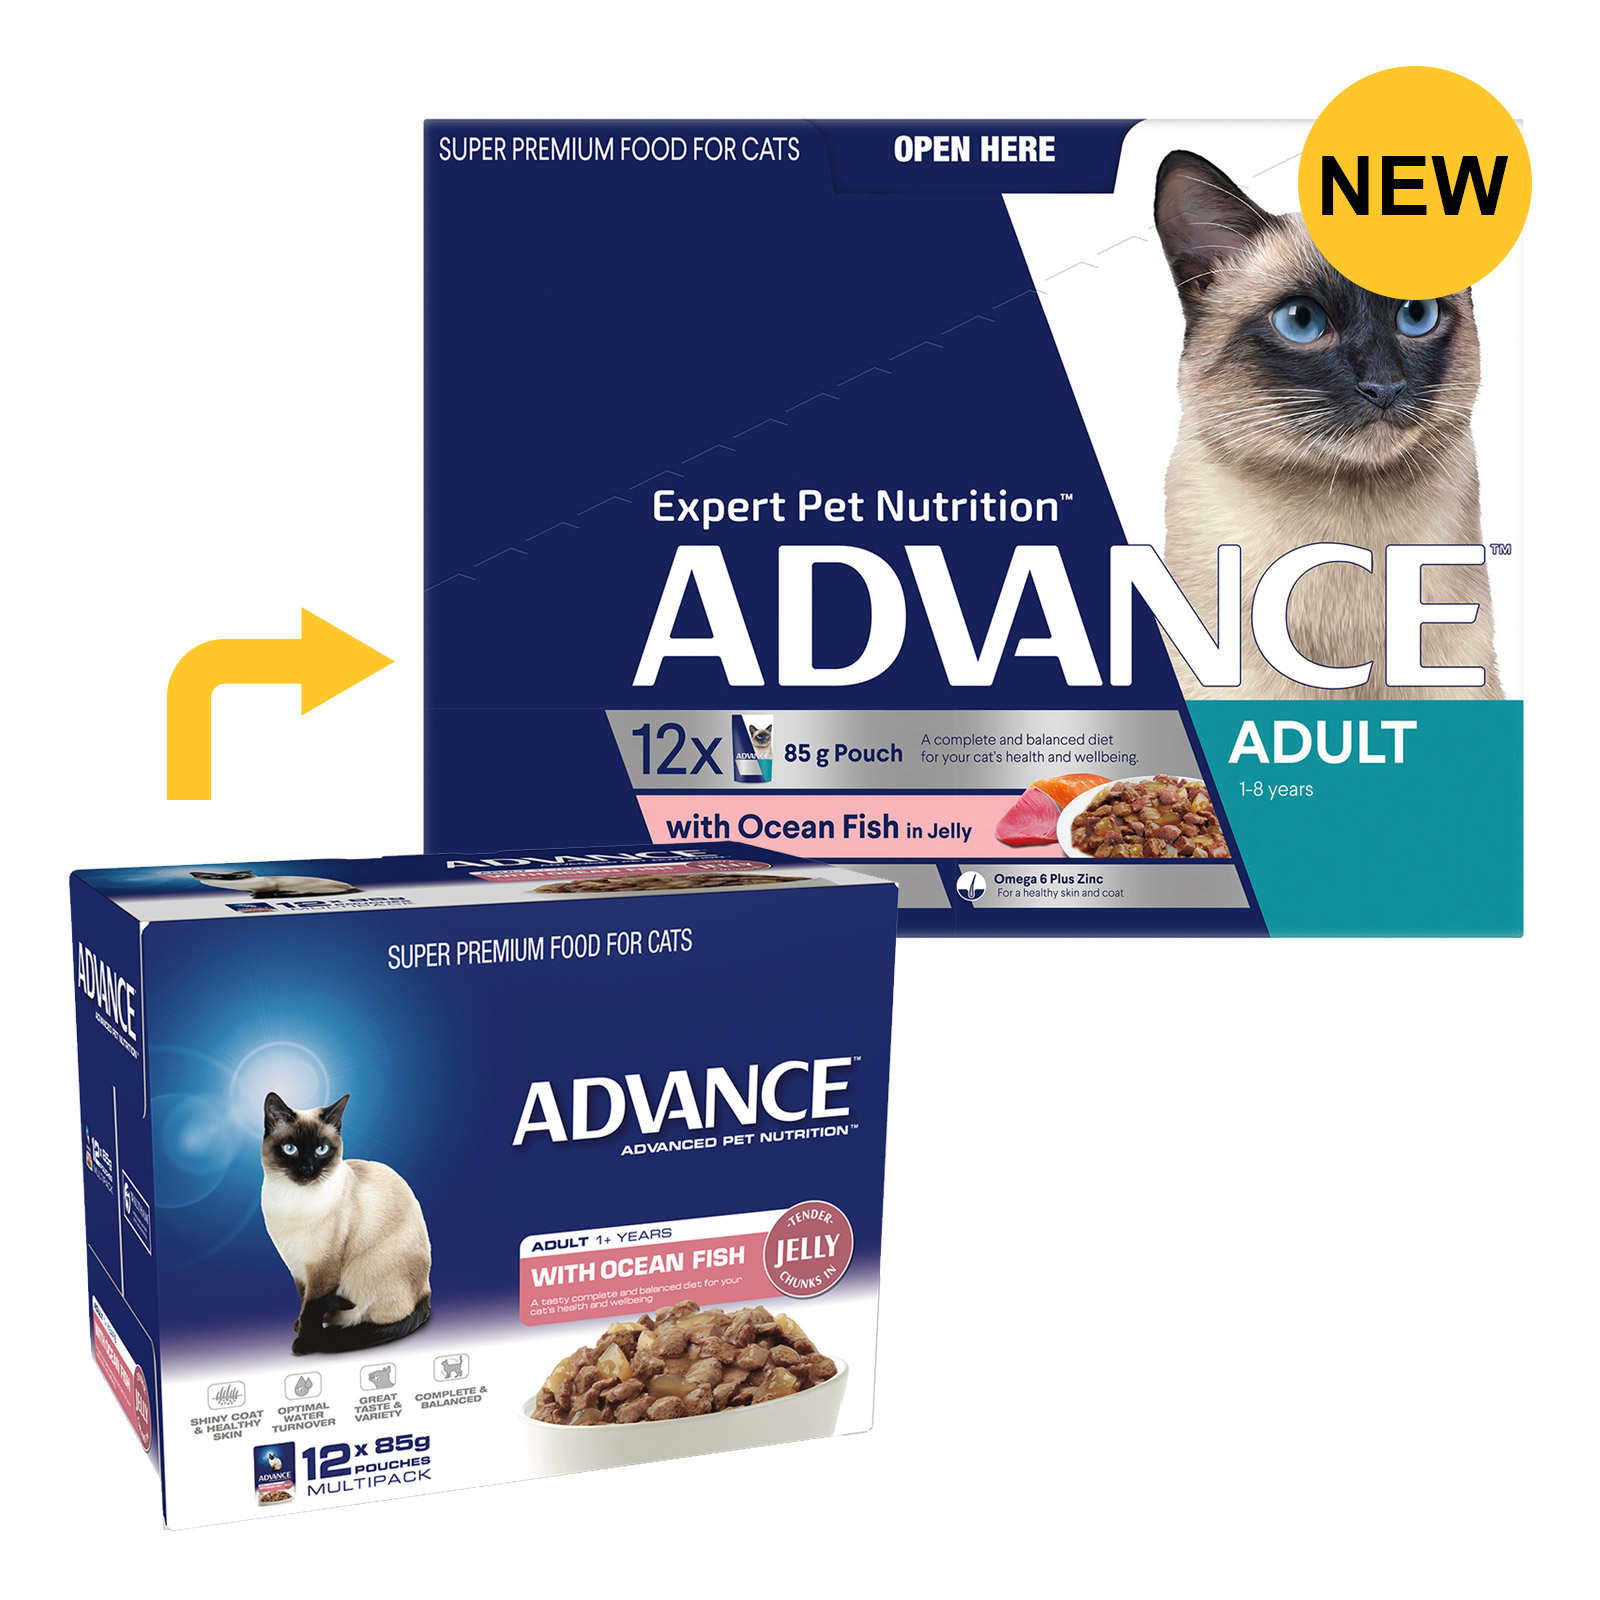 Advance Adult Cat Ocean Fish in Jelly Wet Food Pouch for Food